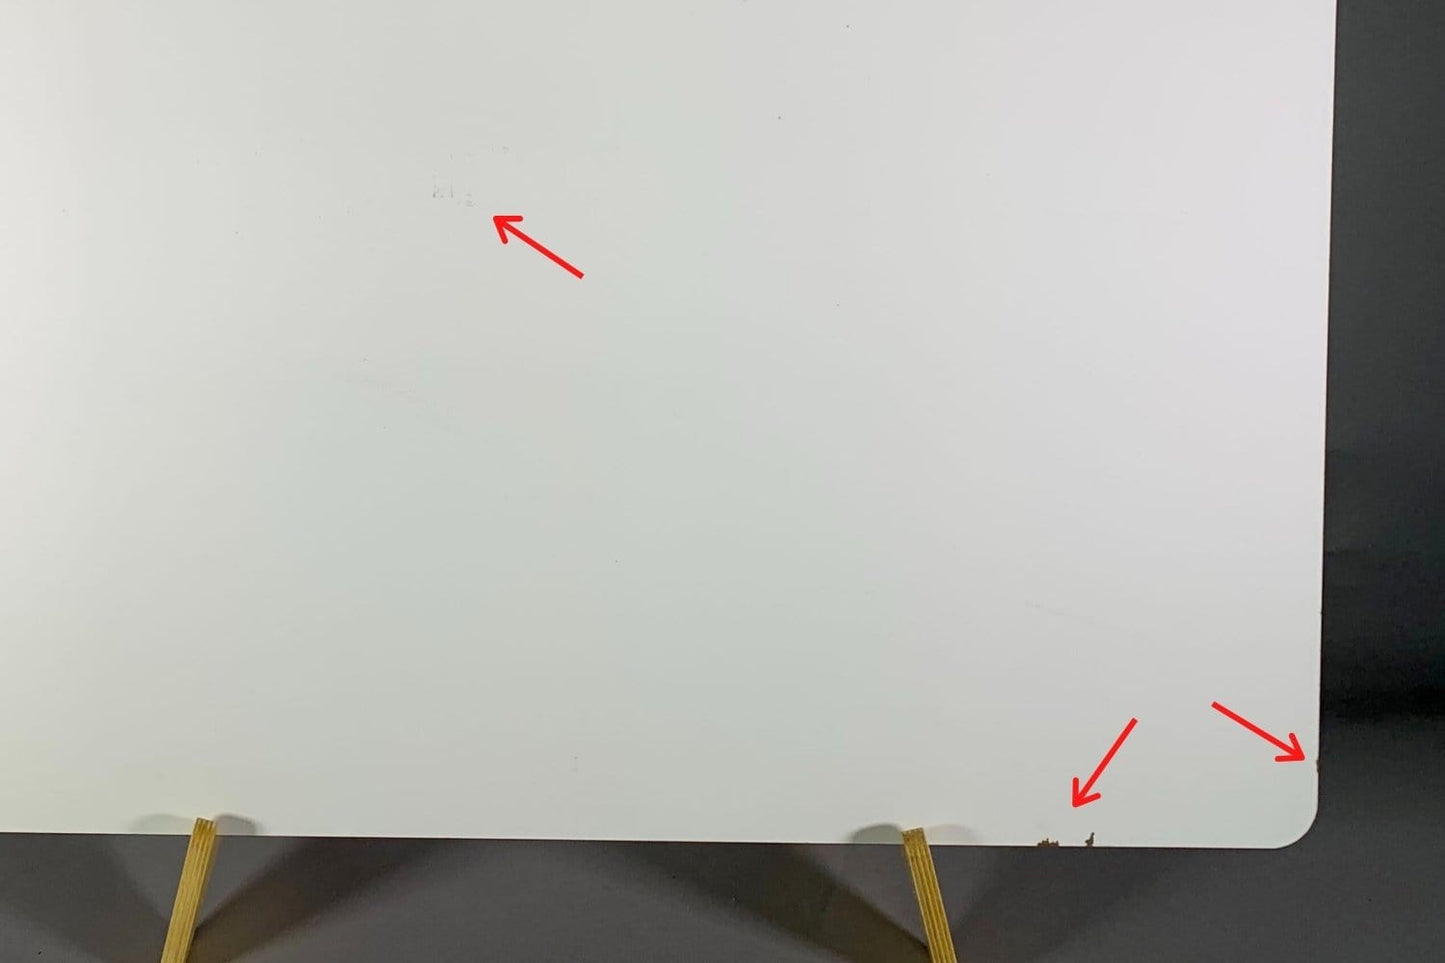 Arbor Scientific Cosmetically Flawed Whiteboards